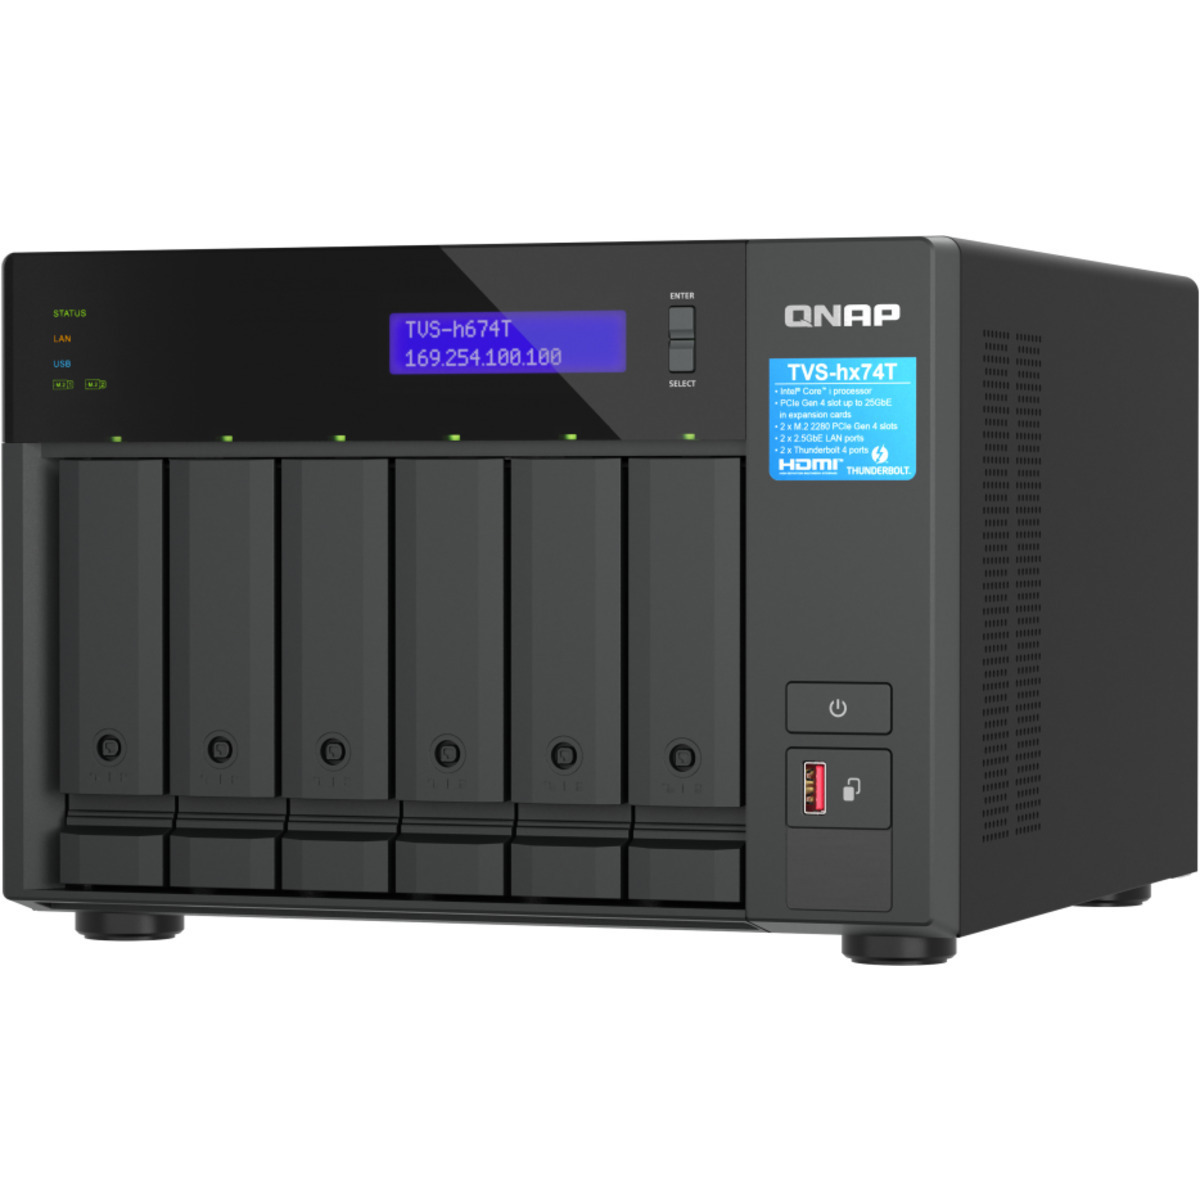 QNAP TVS-h674T Core i5 Thunderbolt 4 110tb 6-Bay Desktop Multimedia / Power User / Business DAS-NAS - Combo Direct + Network Storage Device 5x22tb Seagate IronWolf Pro ST22000NT001 3.5 7200rpm SATA 6Gb/s HDD NAS Class Drives Installed - Burn-In Tested TVS-h674T Core i5 Thunderbolt 4